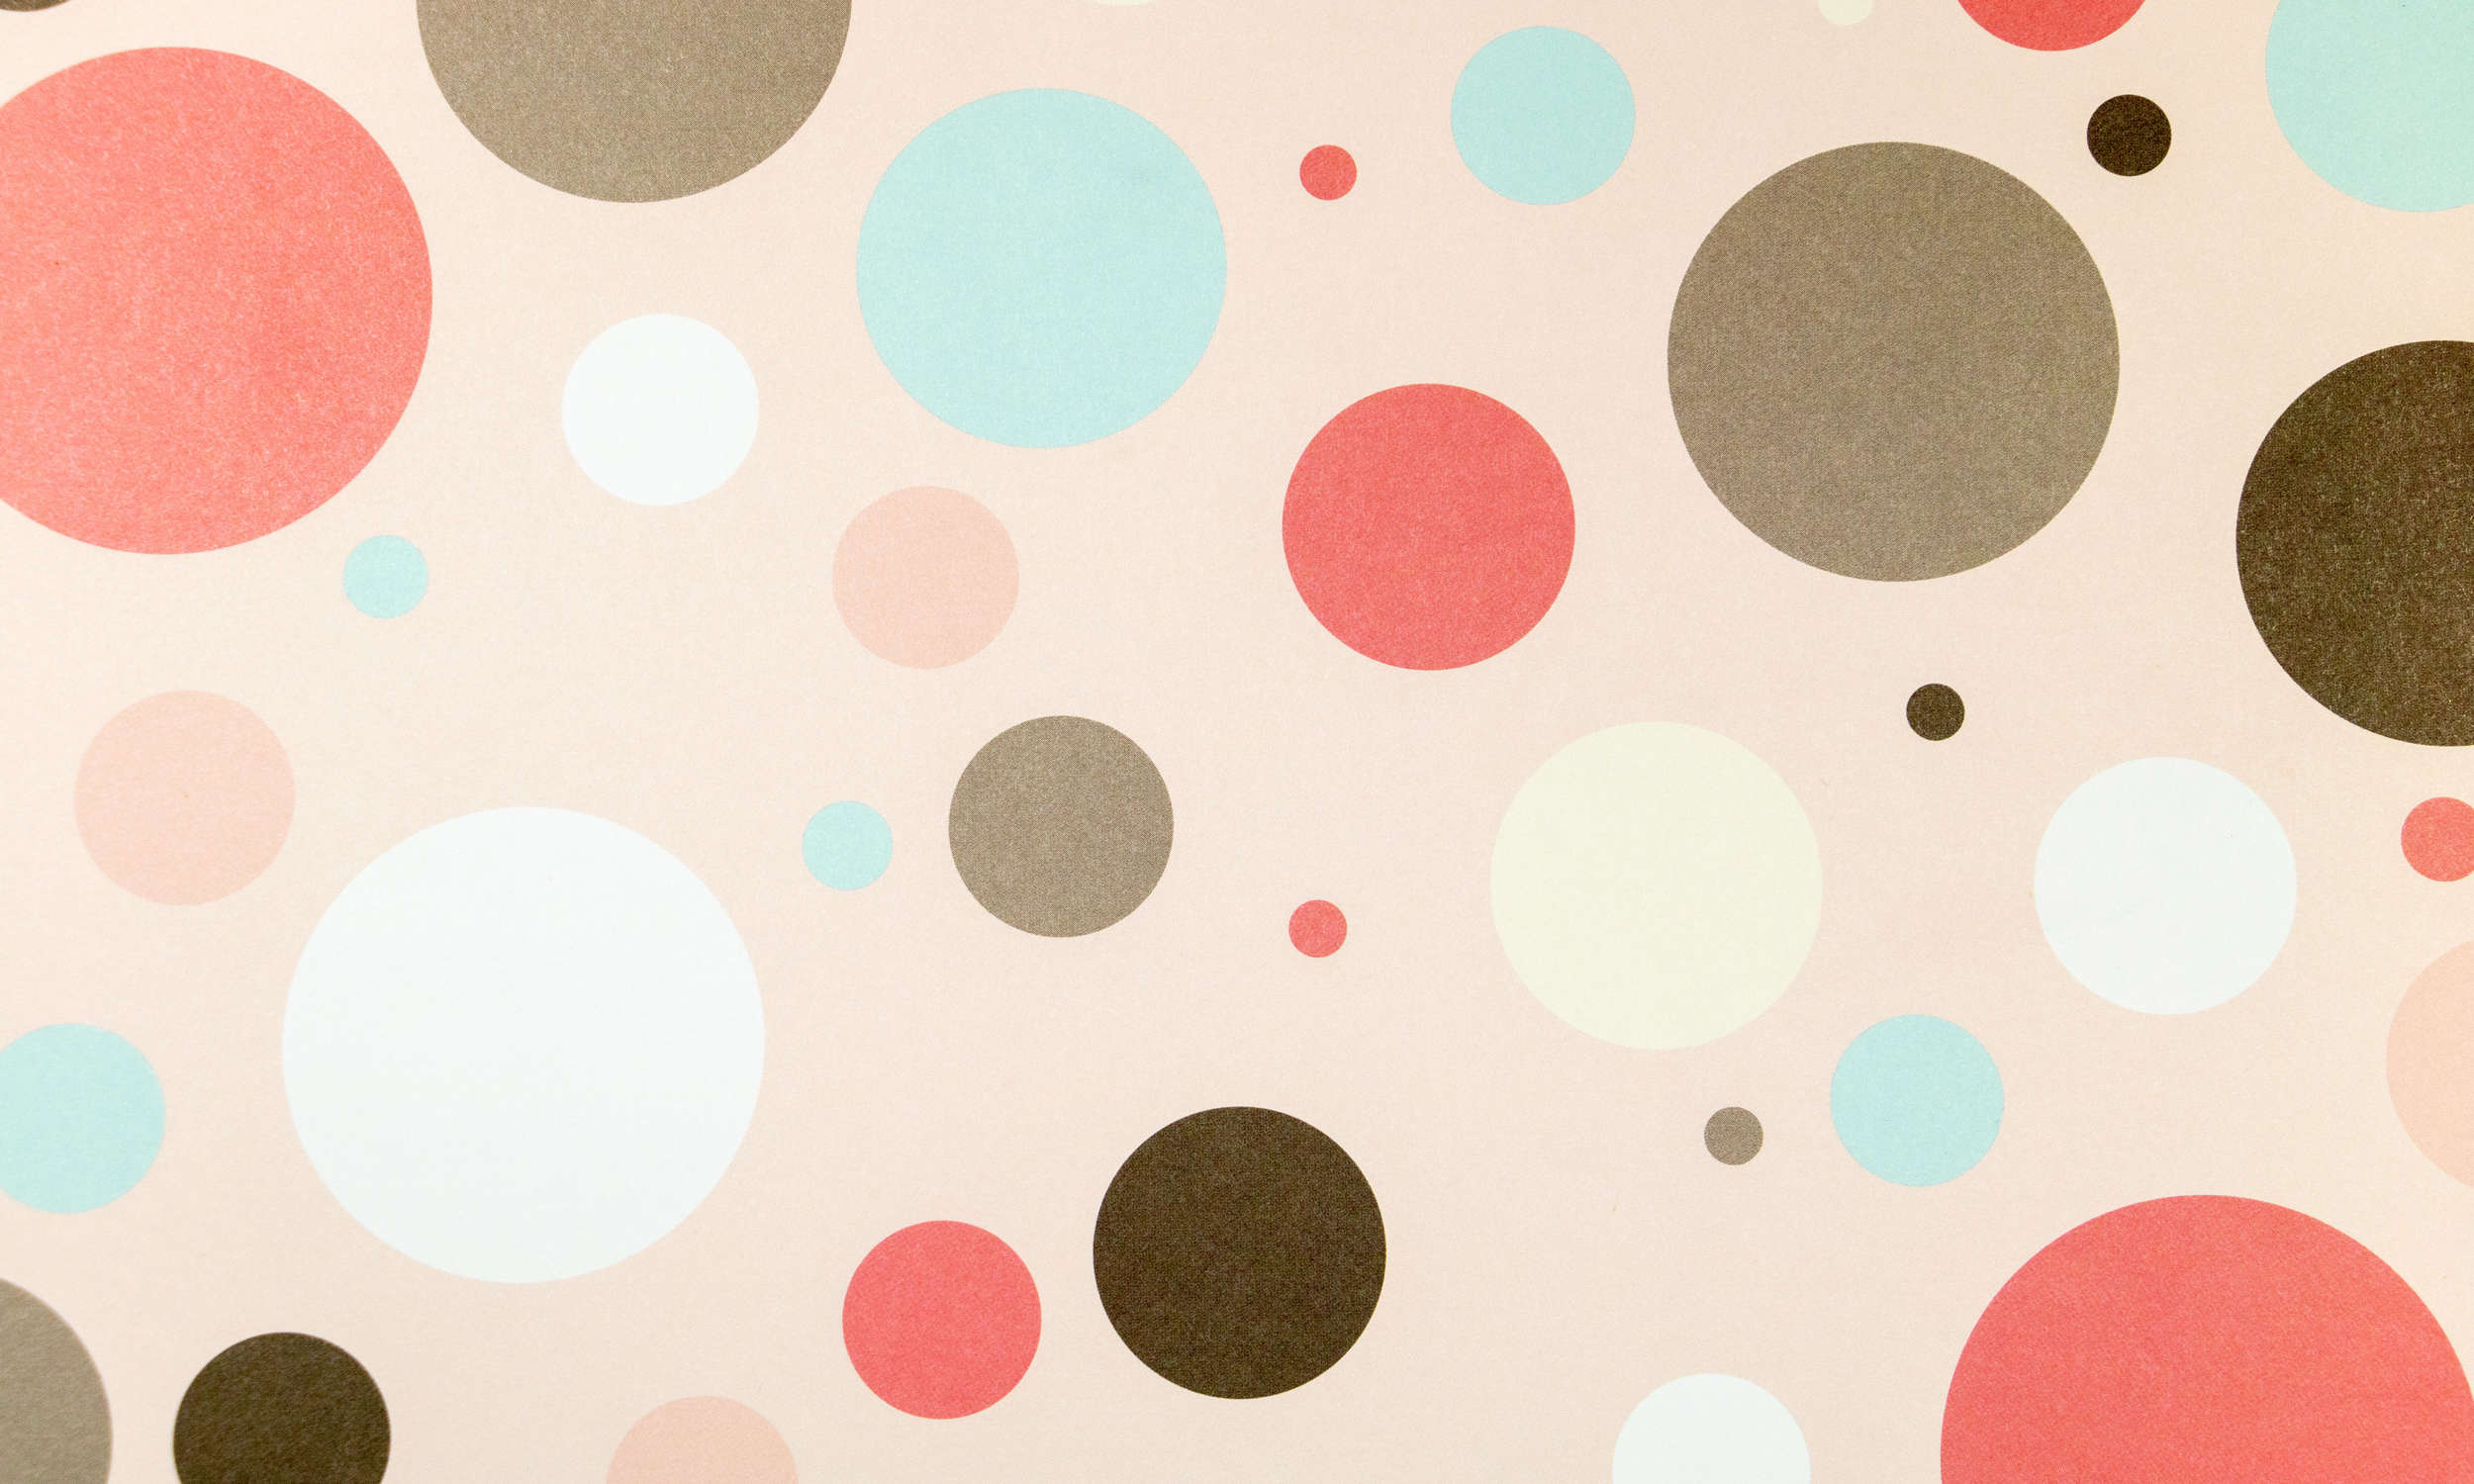             Nursery mural with colourful circles - textured non-woven
        